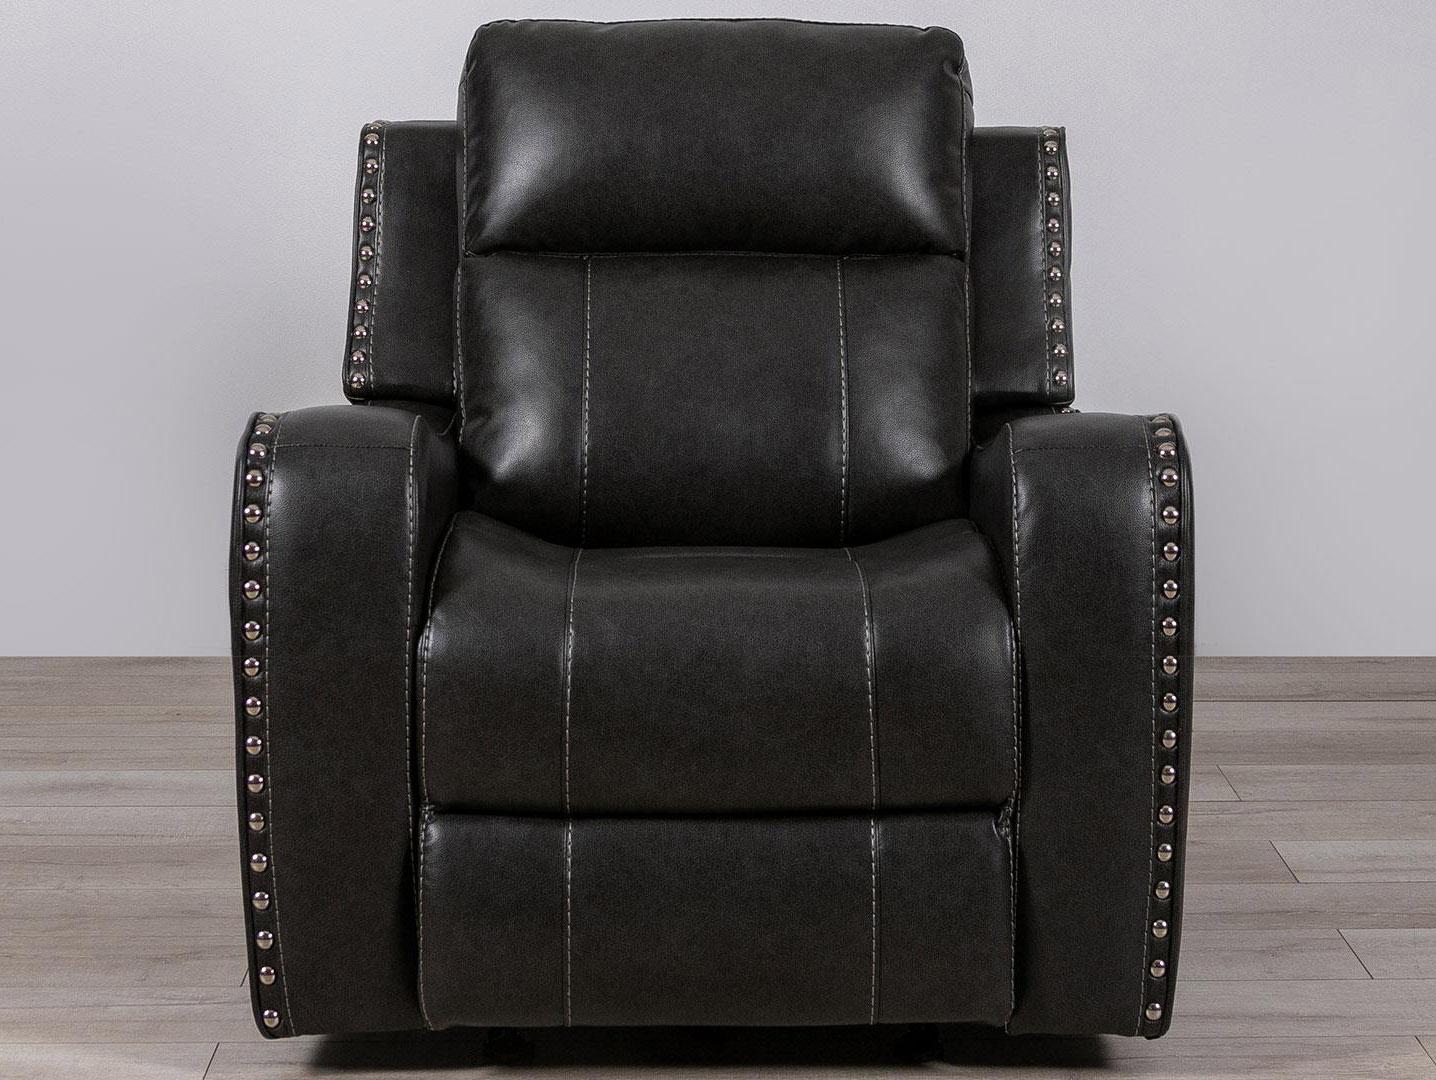 Transitional Glider recliner U131 U131-DTP932-7 CHARCOAL GRY-GR in Charcoal Grey leather Air